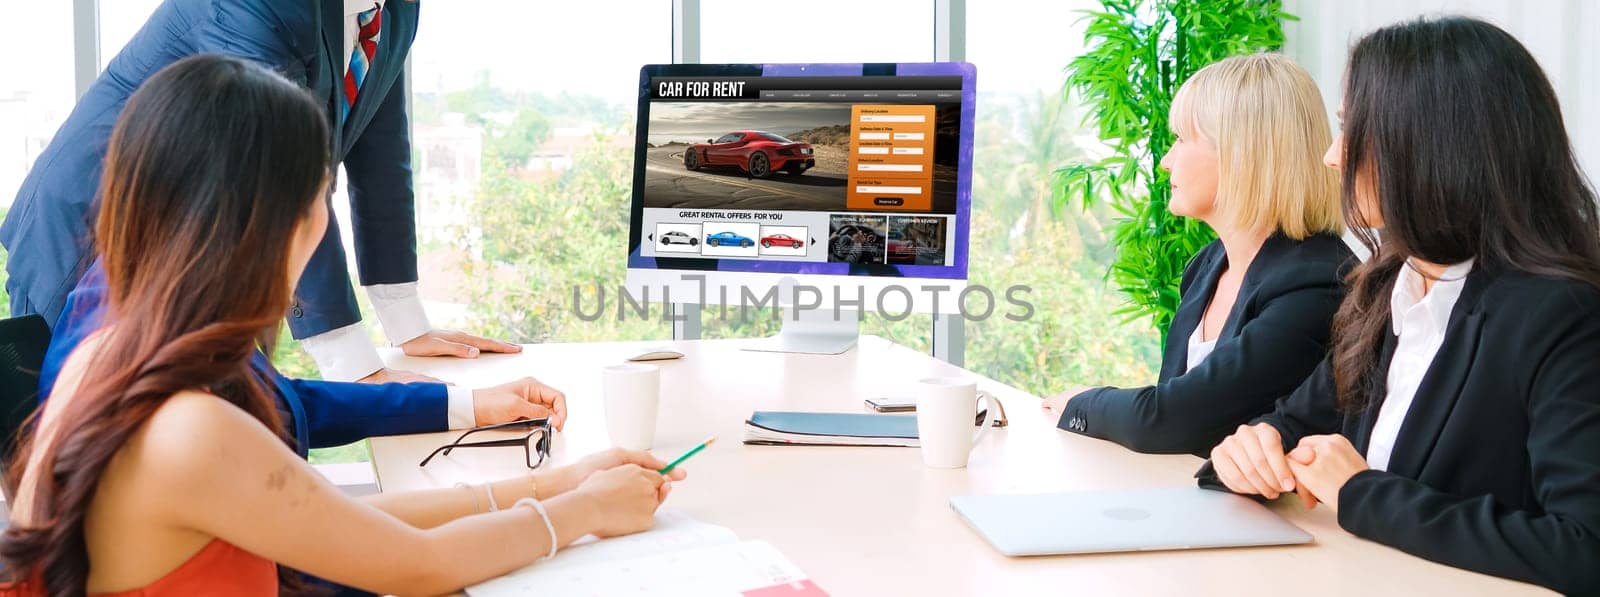 car rental website on computer screen for tourist to rent a car for snugly by biancoblue